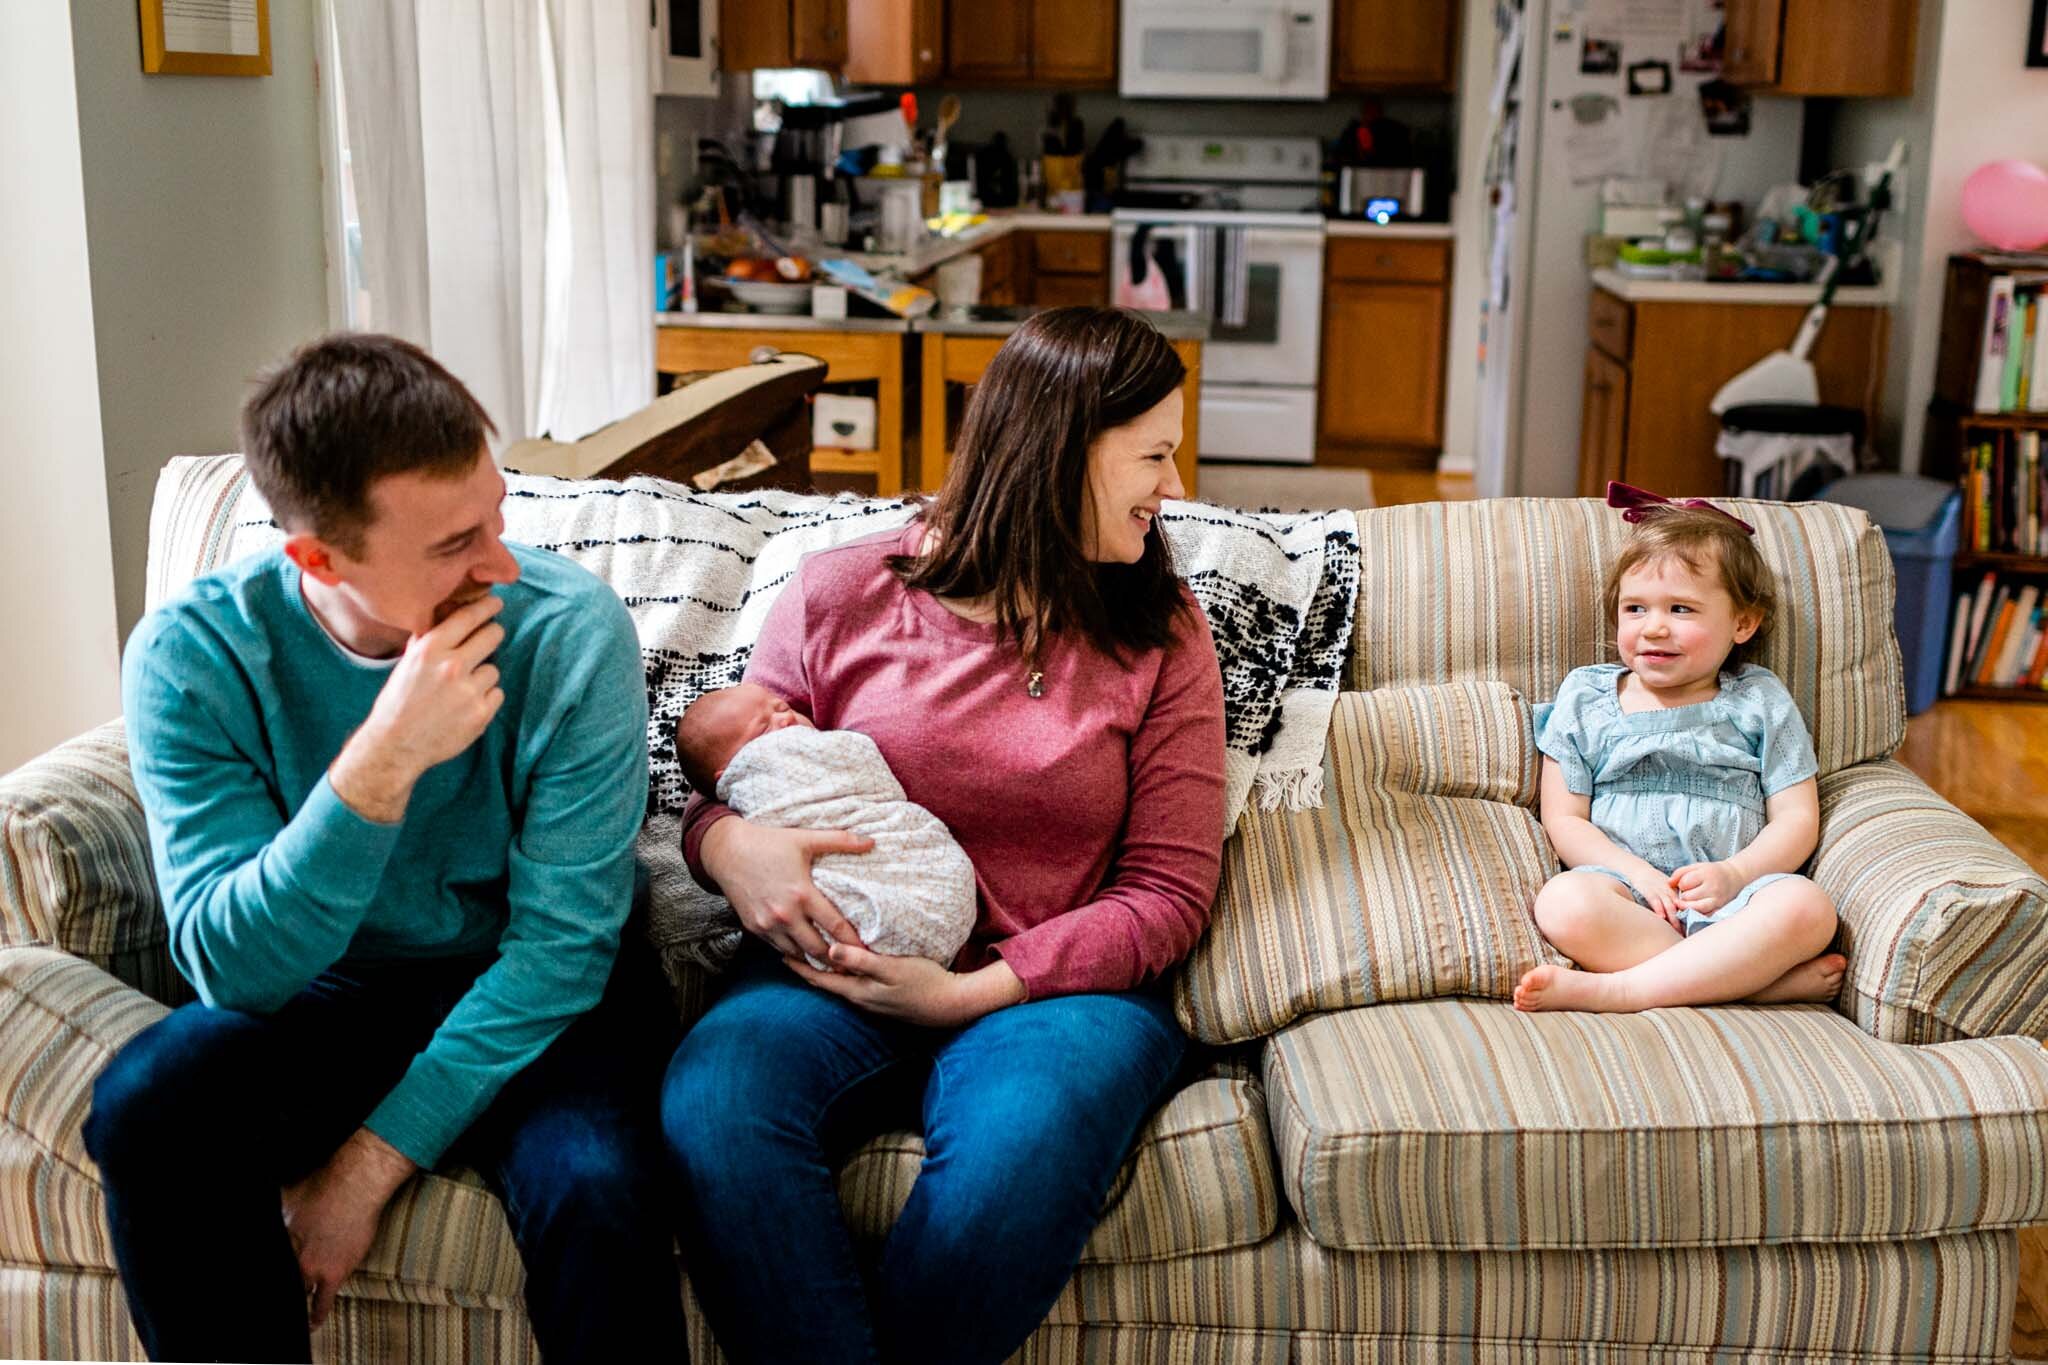 Hillsborough Newborn Photographer | By G. Lin Photography | Family laughing and sitting together on couch